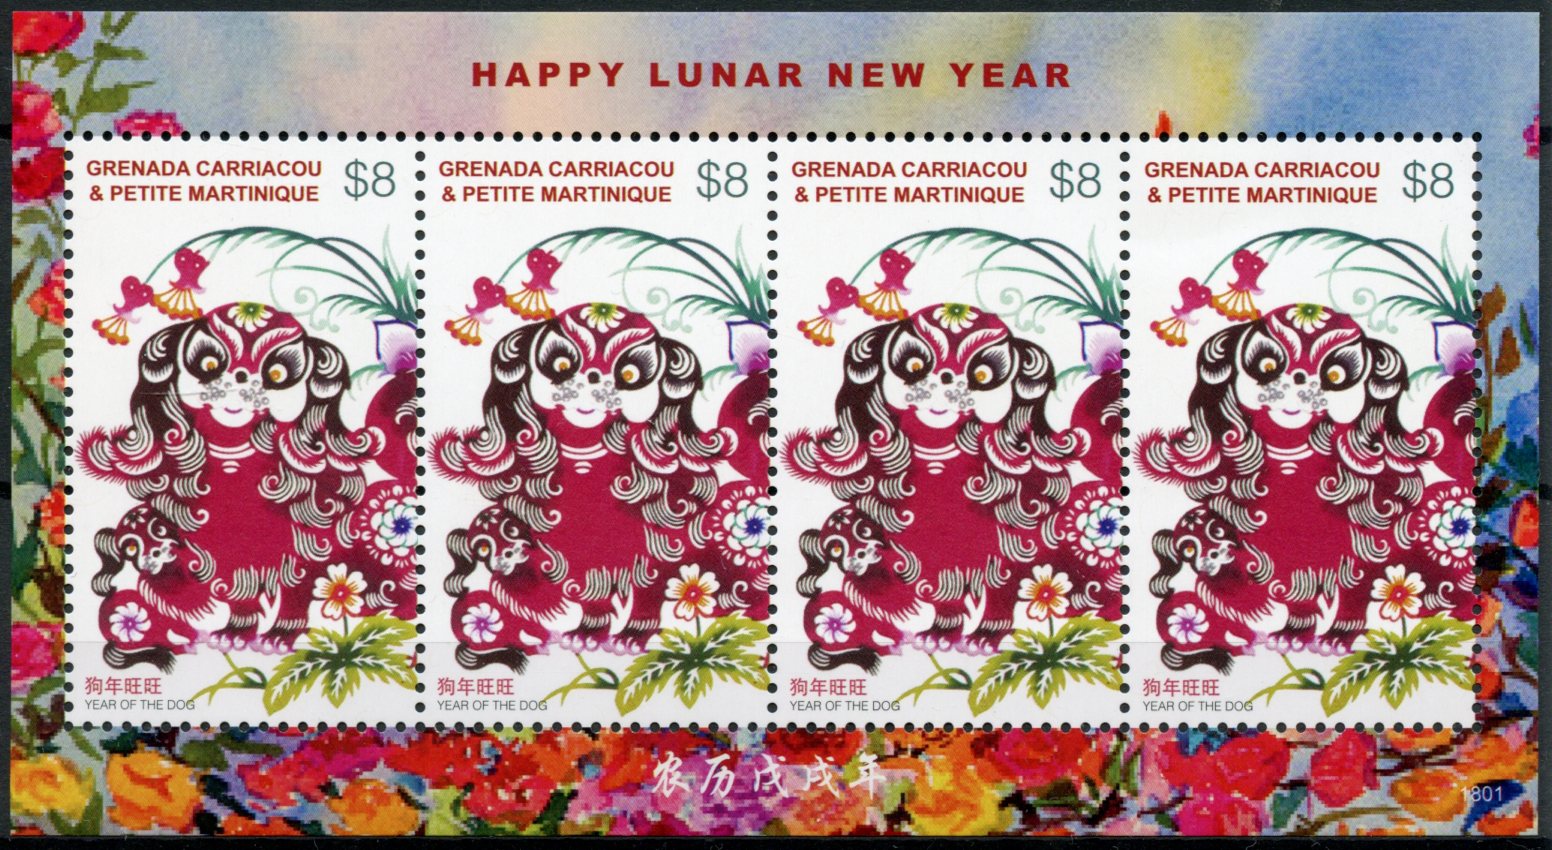 Grenada Grenadines 2018 MNH Year of Dog 4v M/S Chinese Lunar New Year Stamps